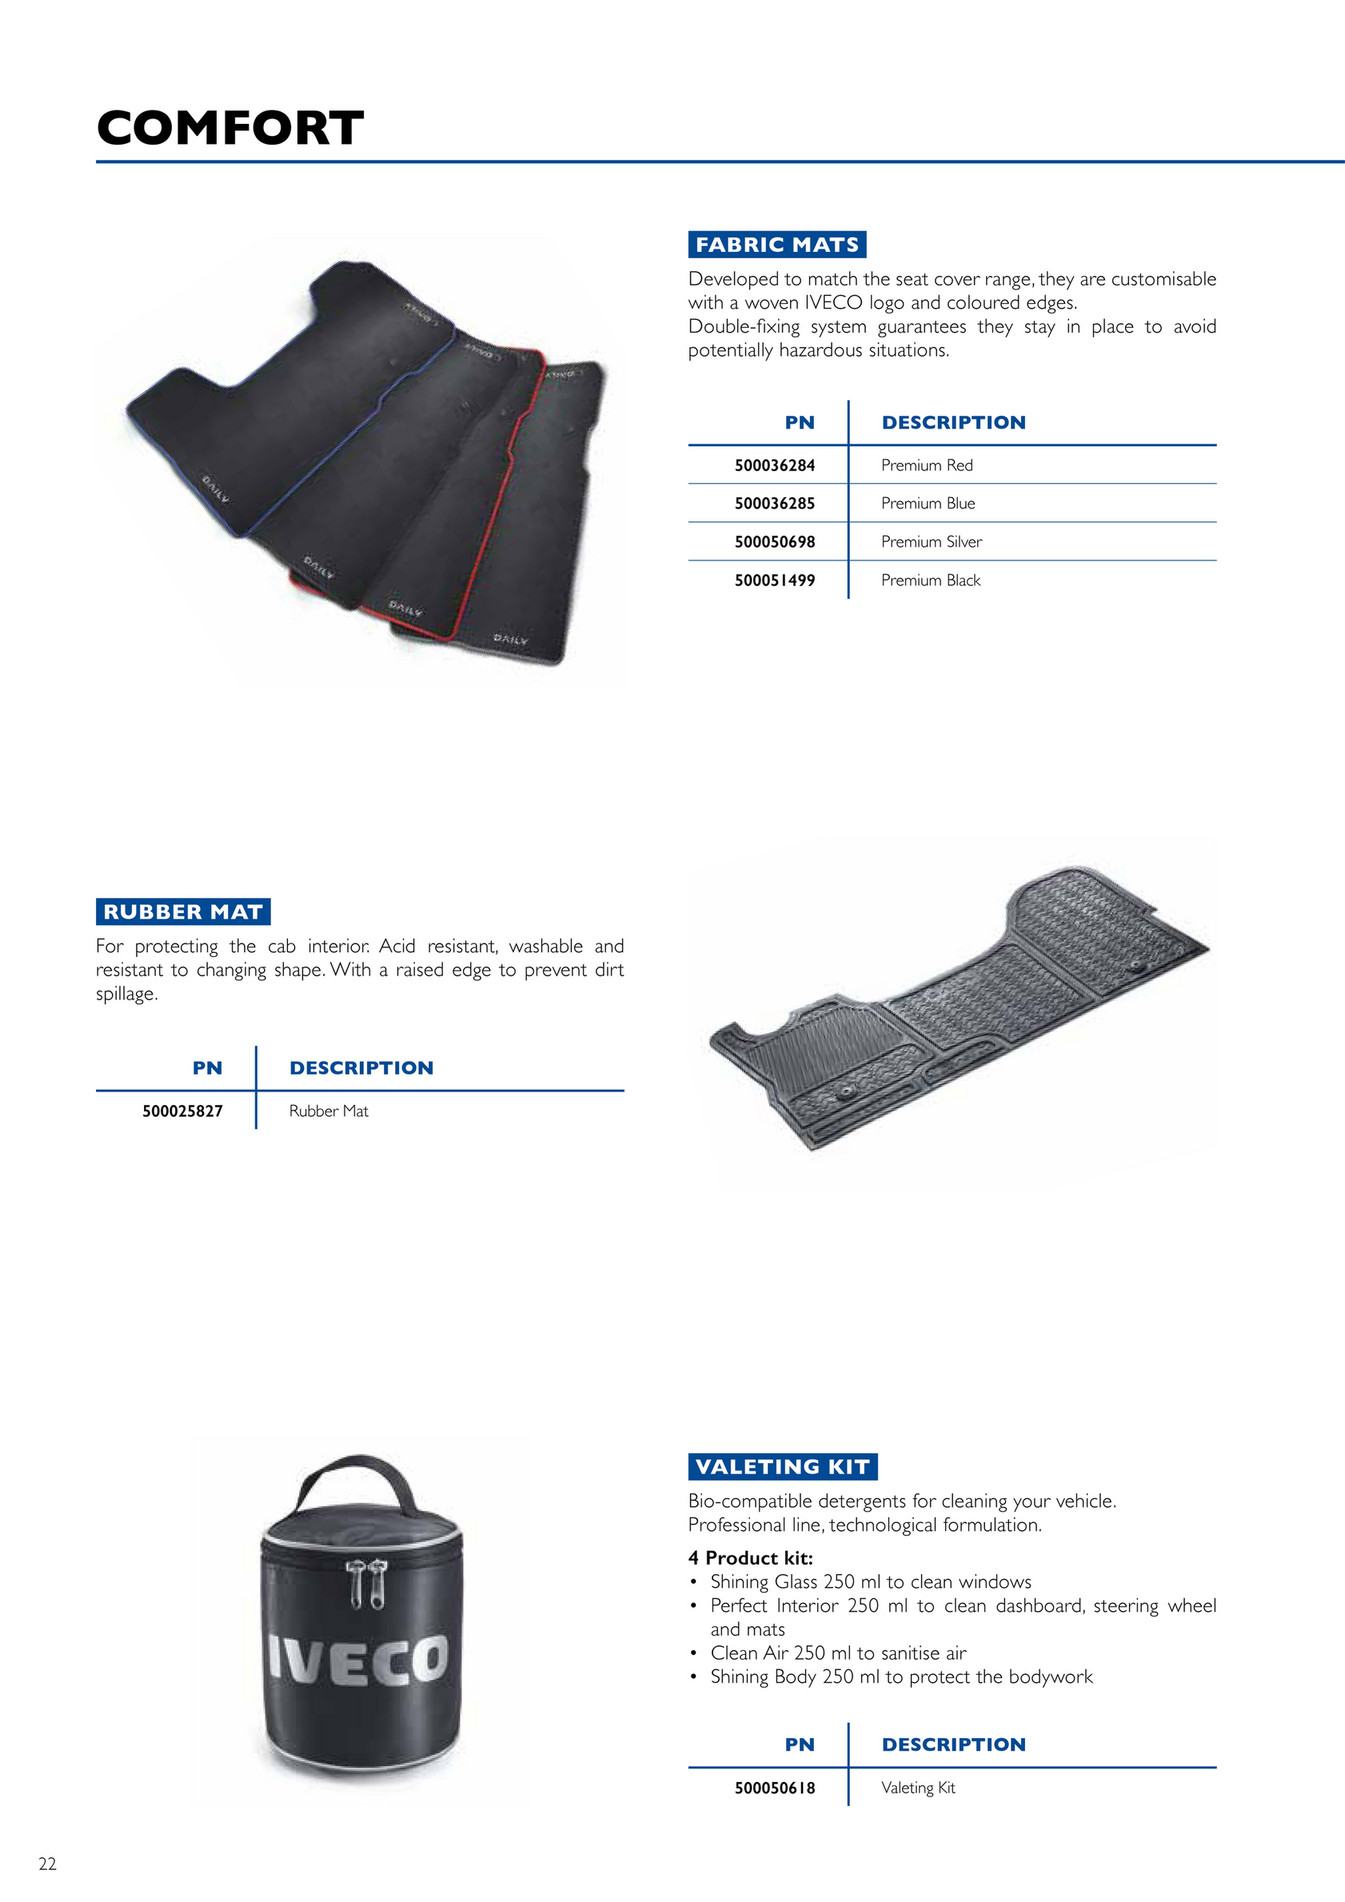 IVECO - New Daily ACCESSORIES CATALOGUE 2019 (EN) - Page 22-23 - Created  with